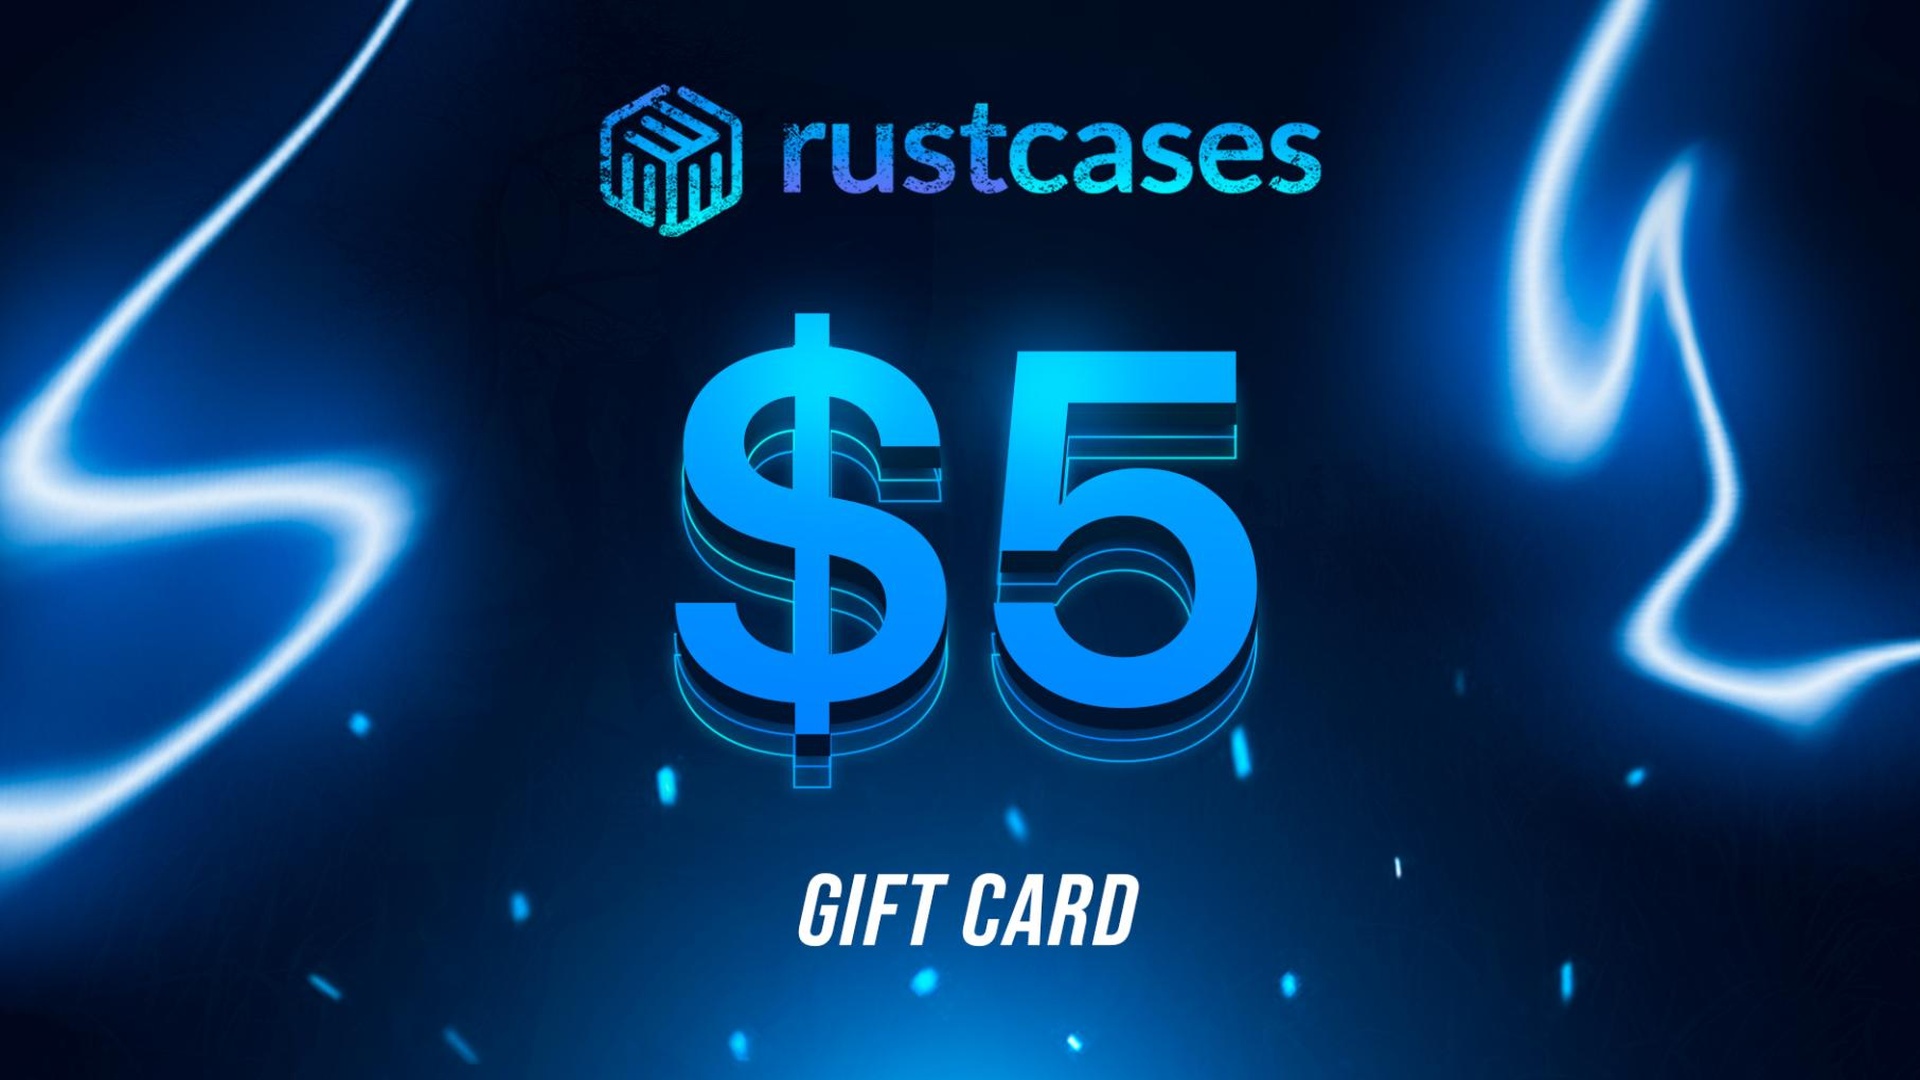 [$ 5.38] RUSTCASES.com $5 Gift Card